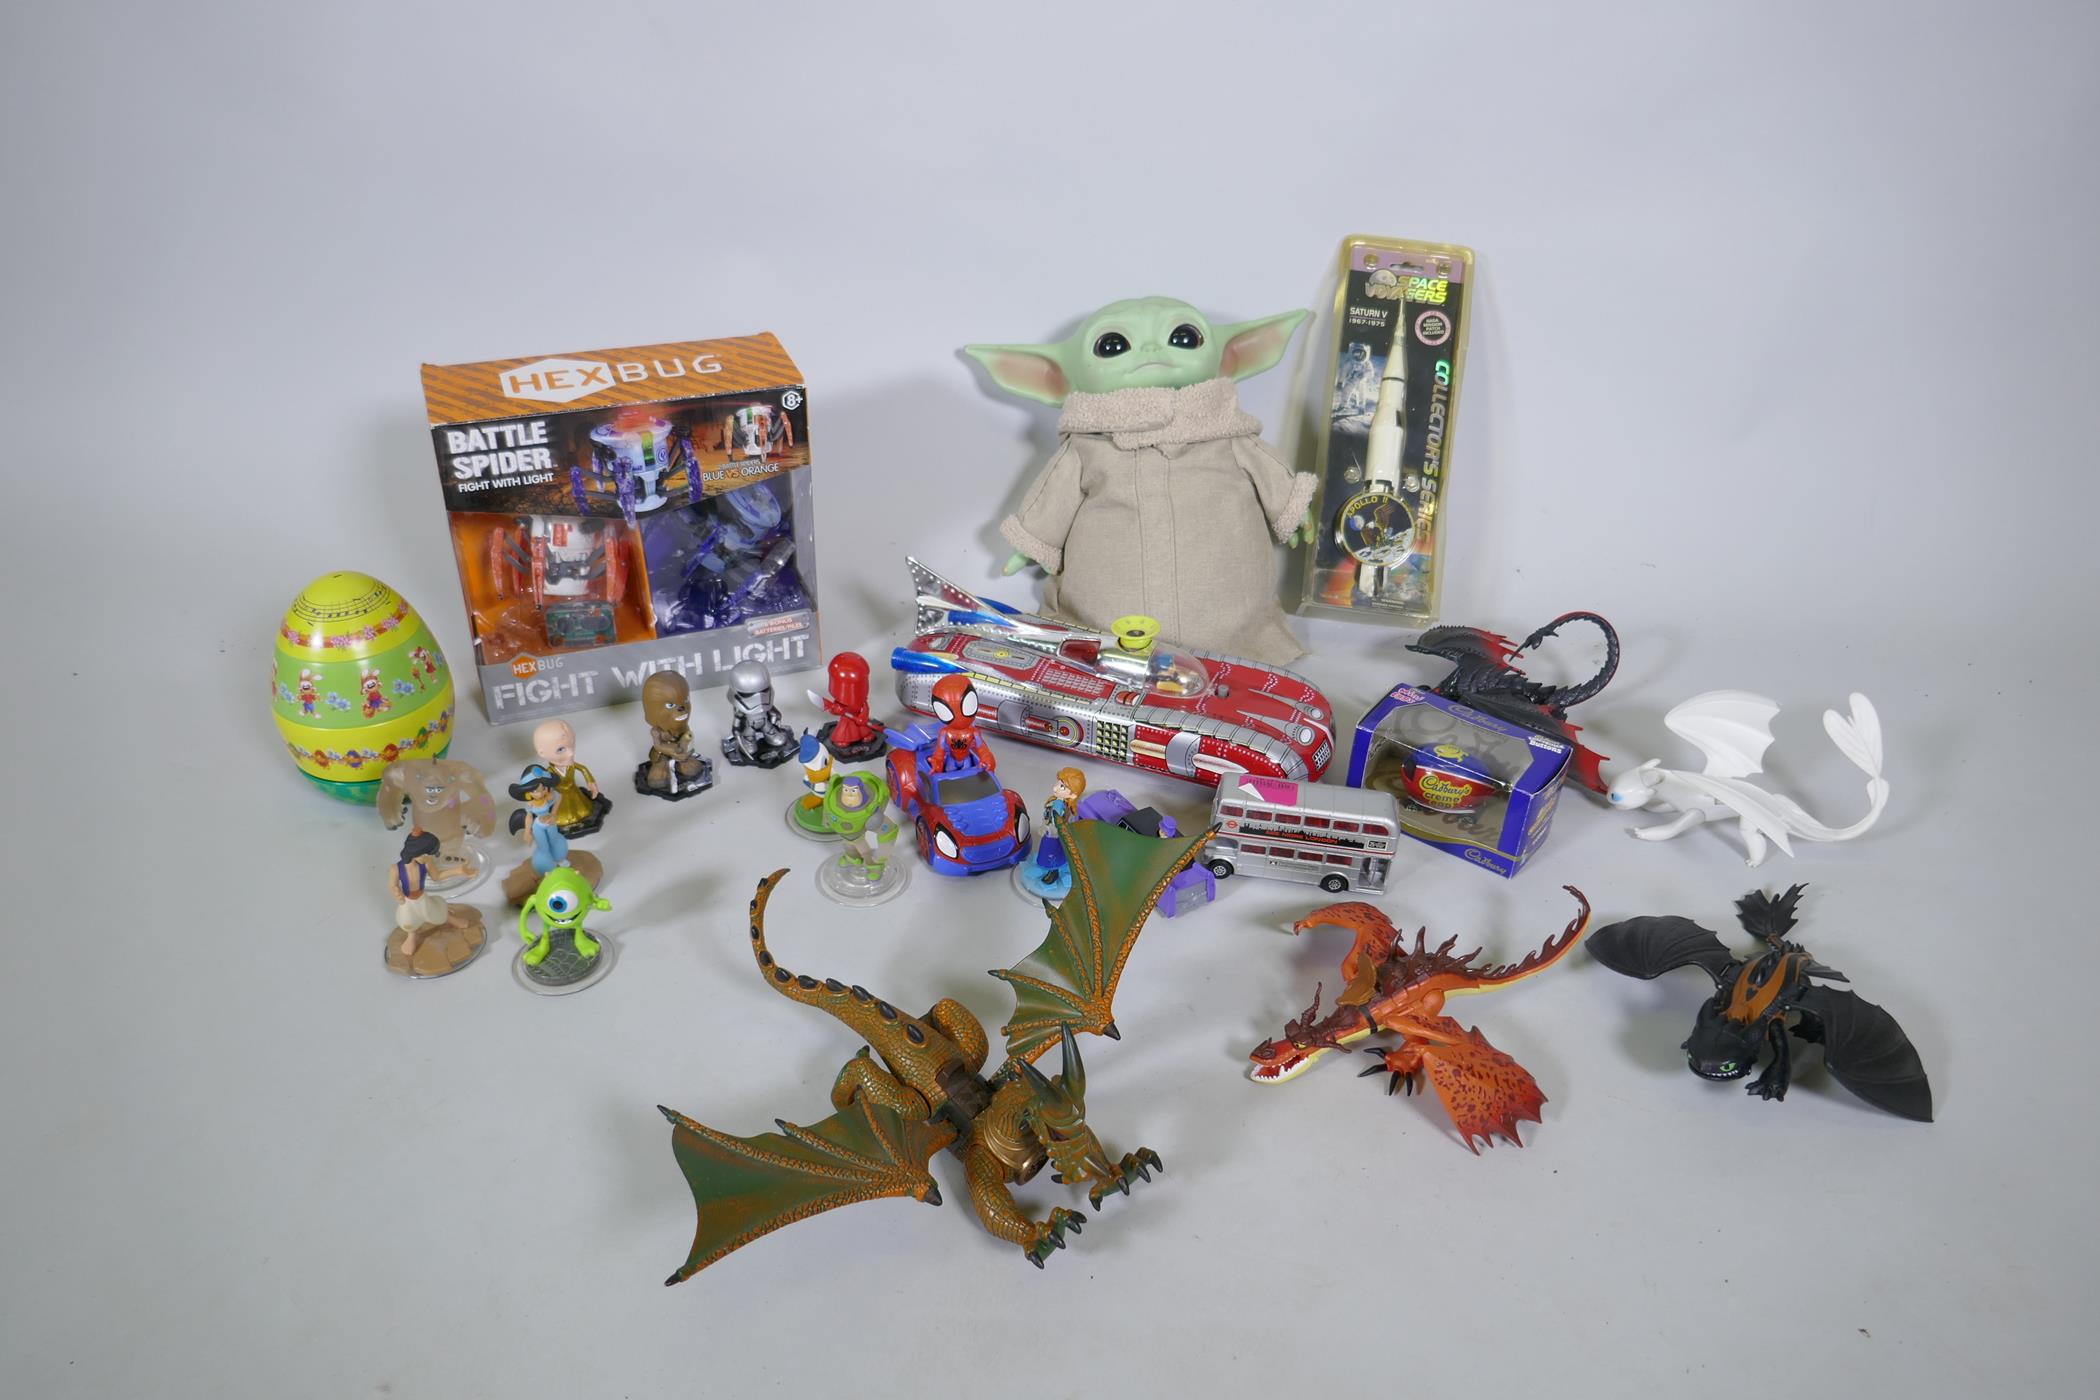 A quantity of Star Wars and Disney figures, toys etc